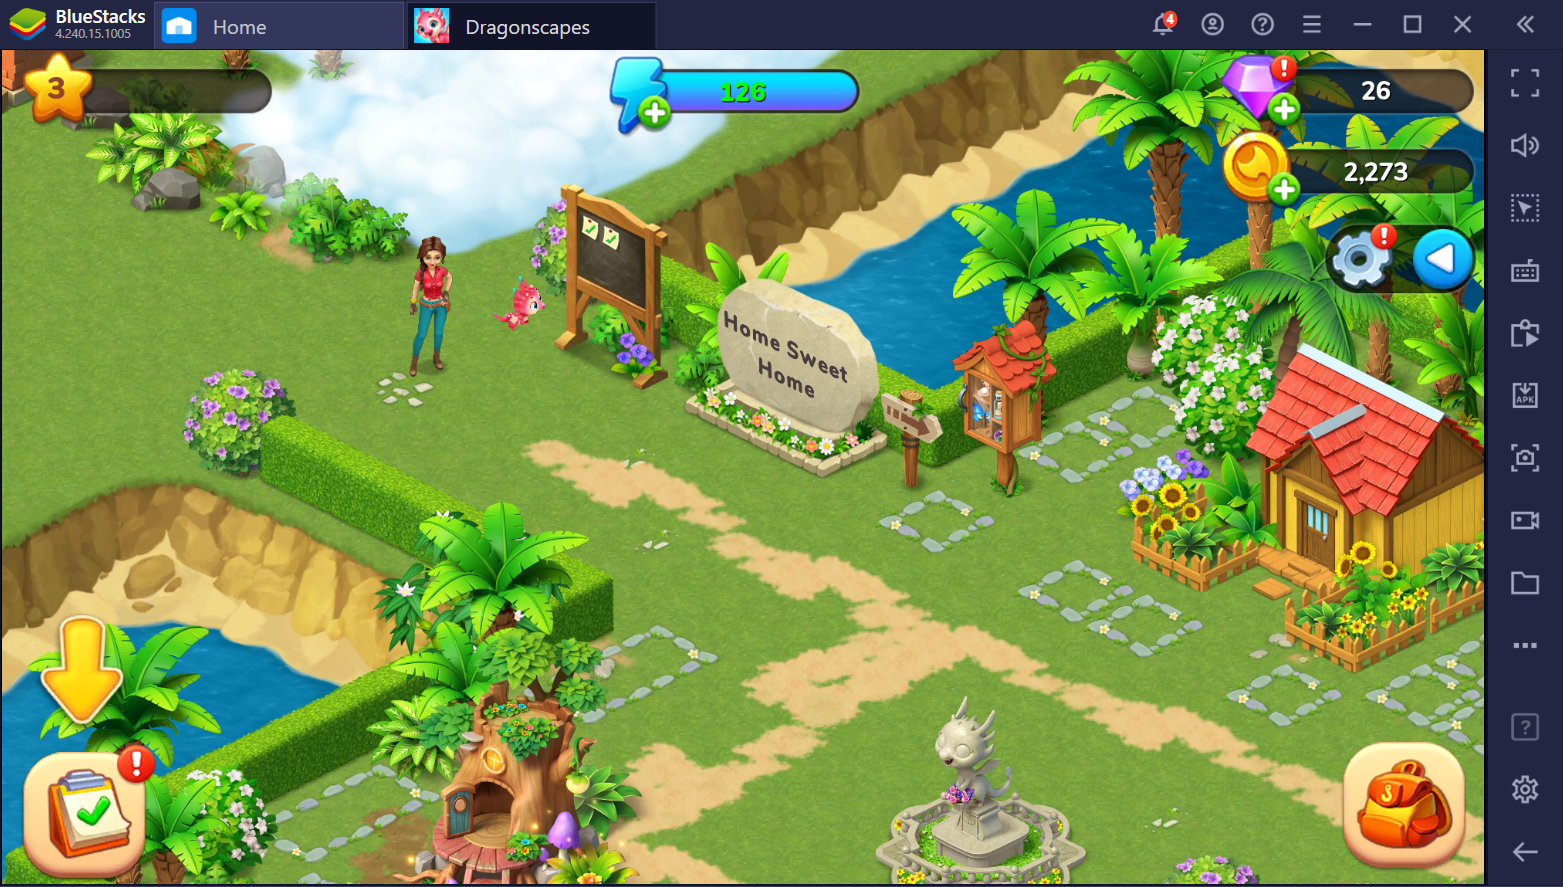 Dragonscapes Adventure on PC with BlueStacks: A Fun and Relaxing Game with Dragons!